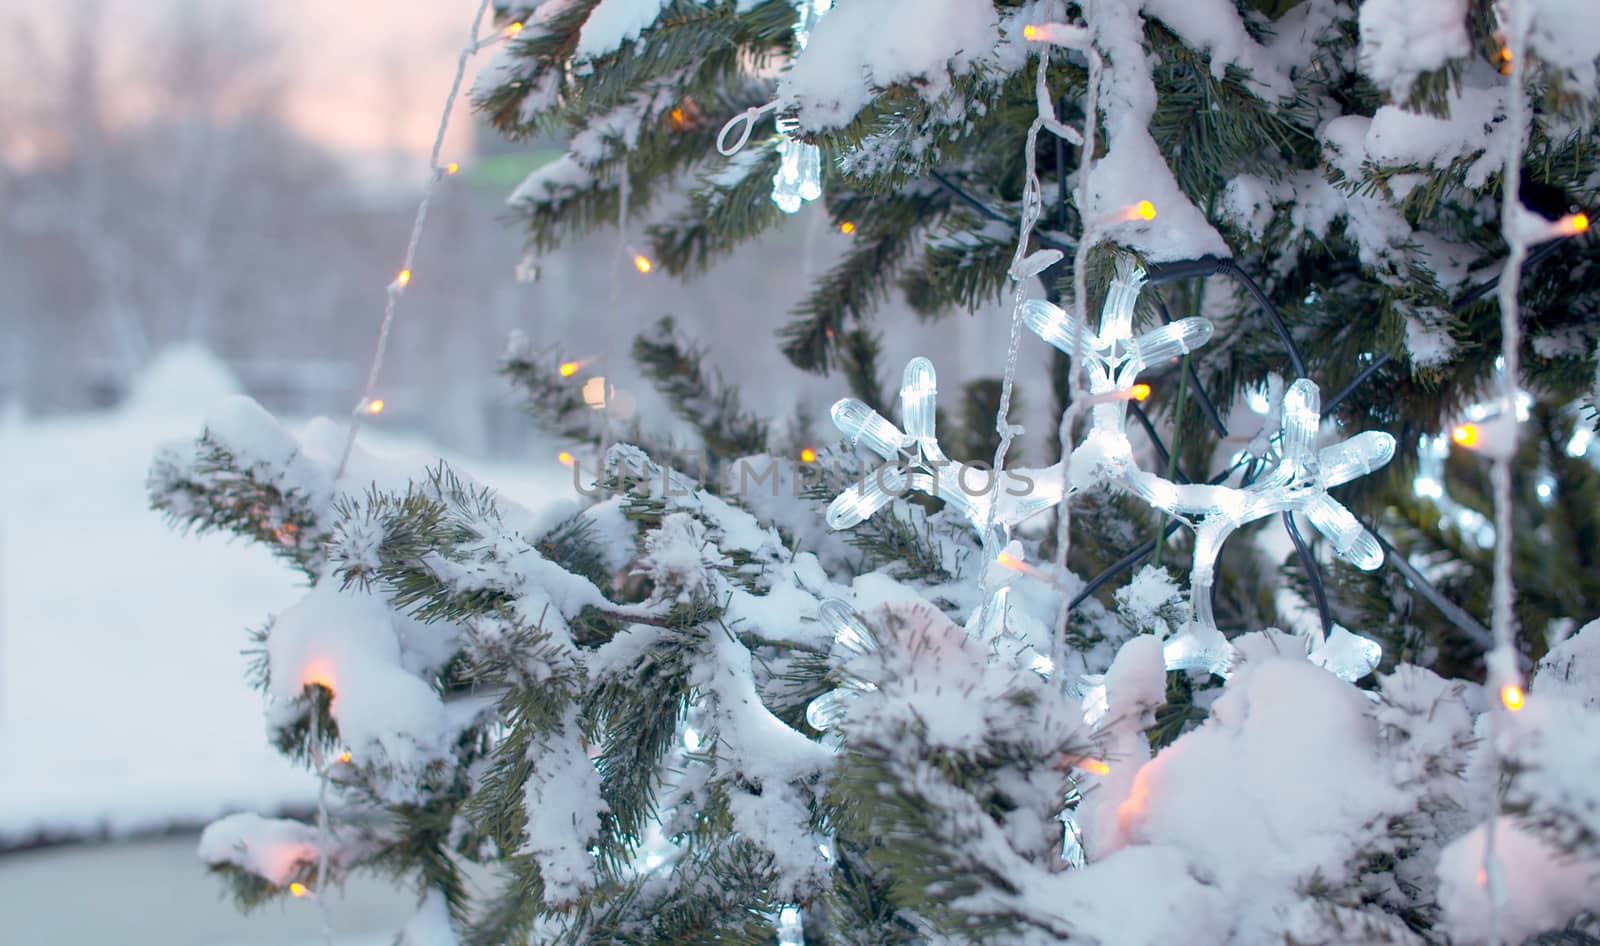 Close up snow covered branches of Christmas tree outdoors. Flickering lights of a garland. City holiday decorations. Snowfall in the city.